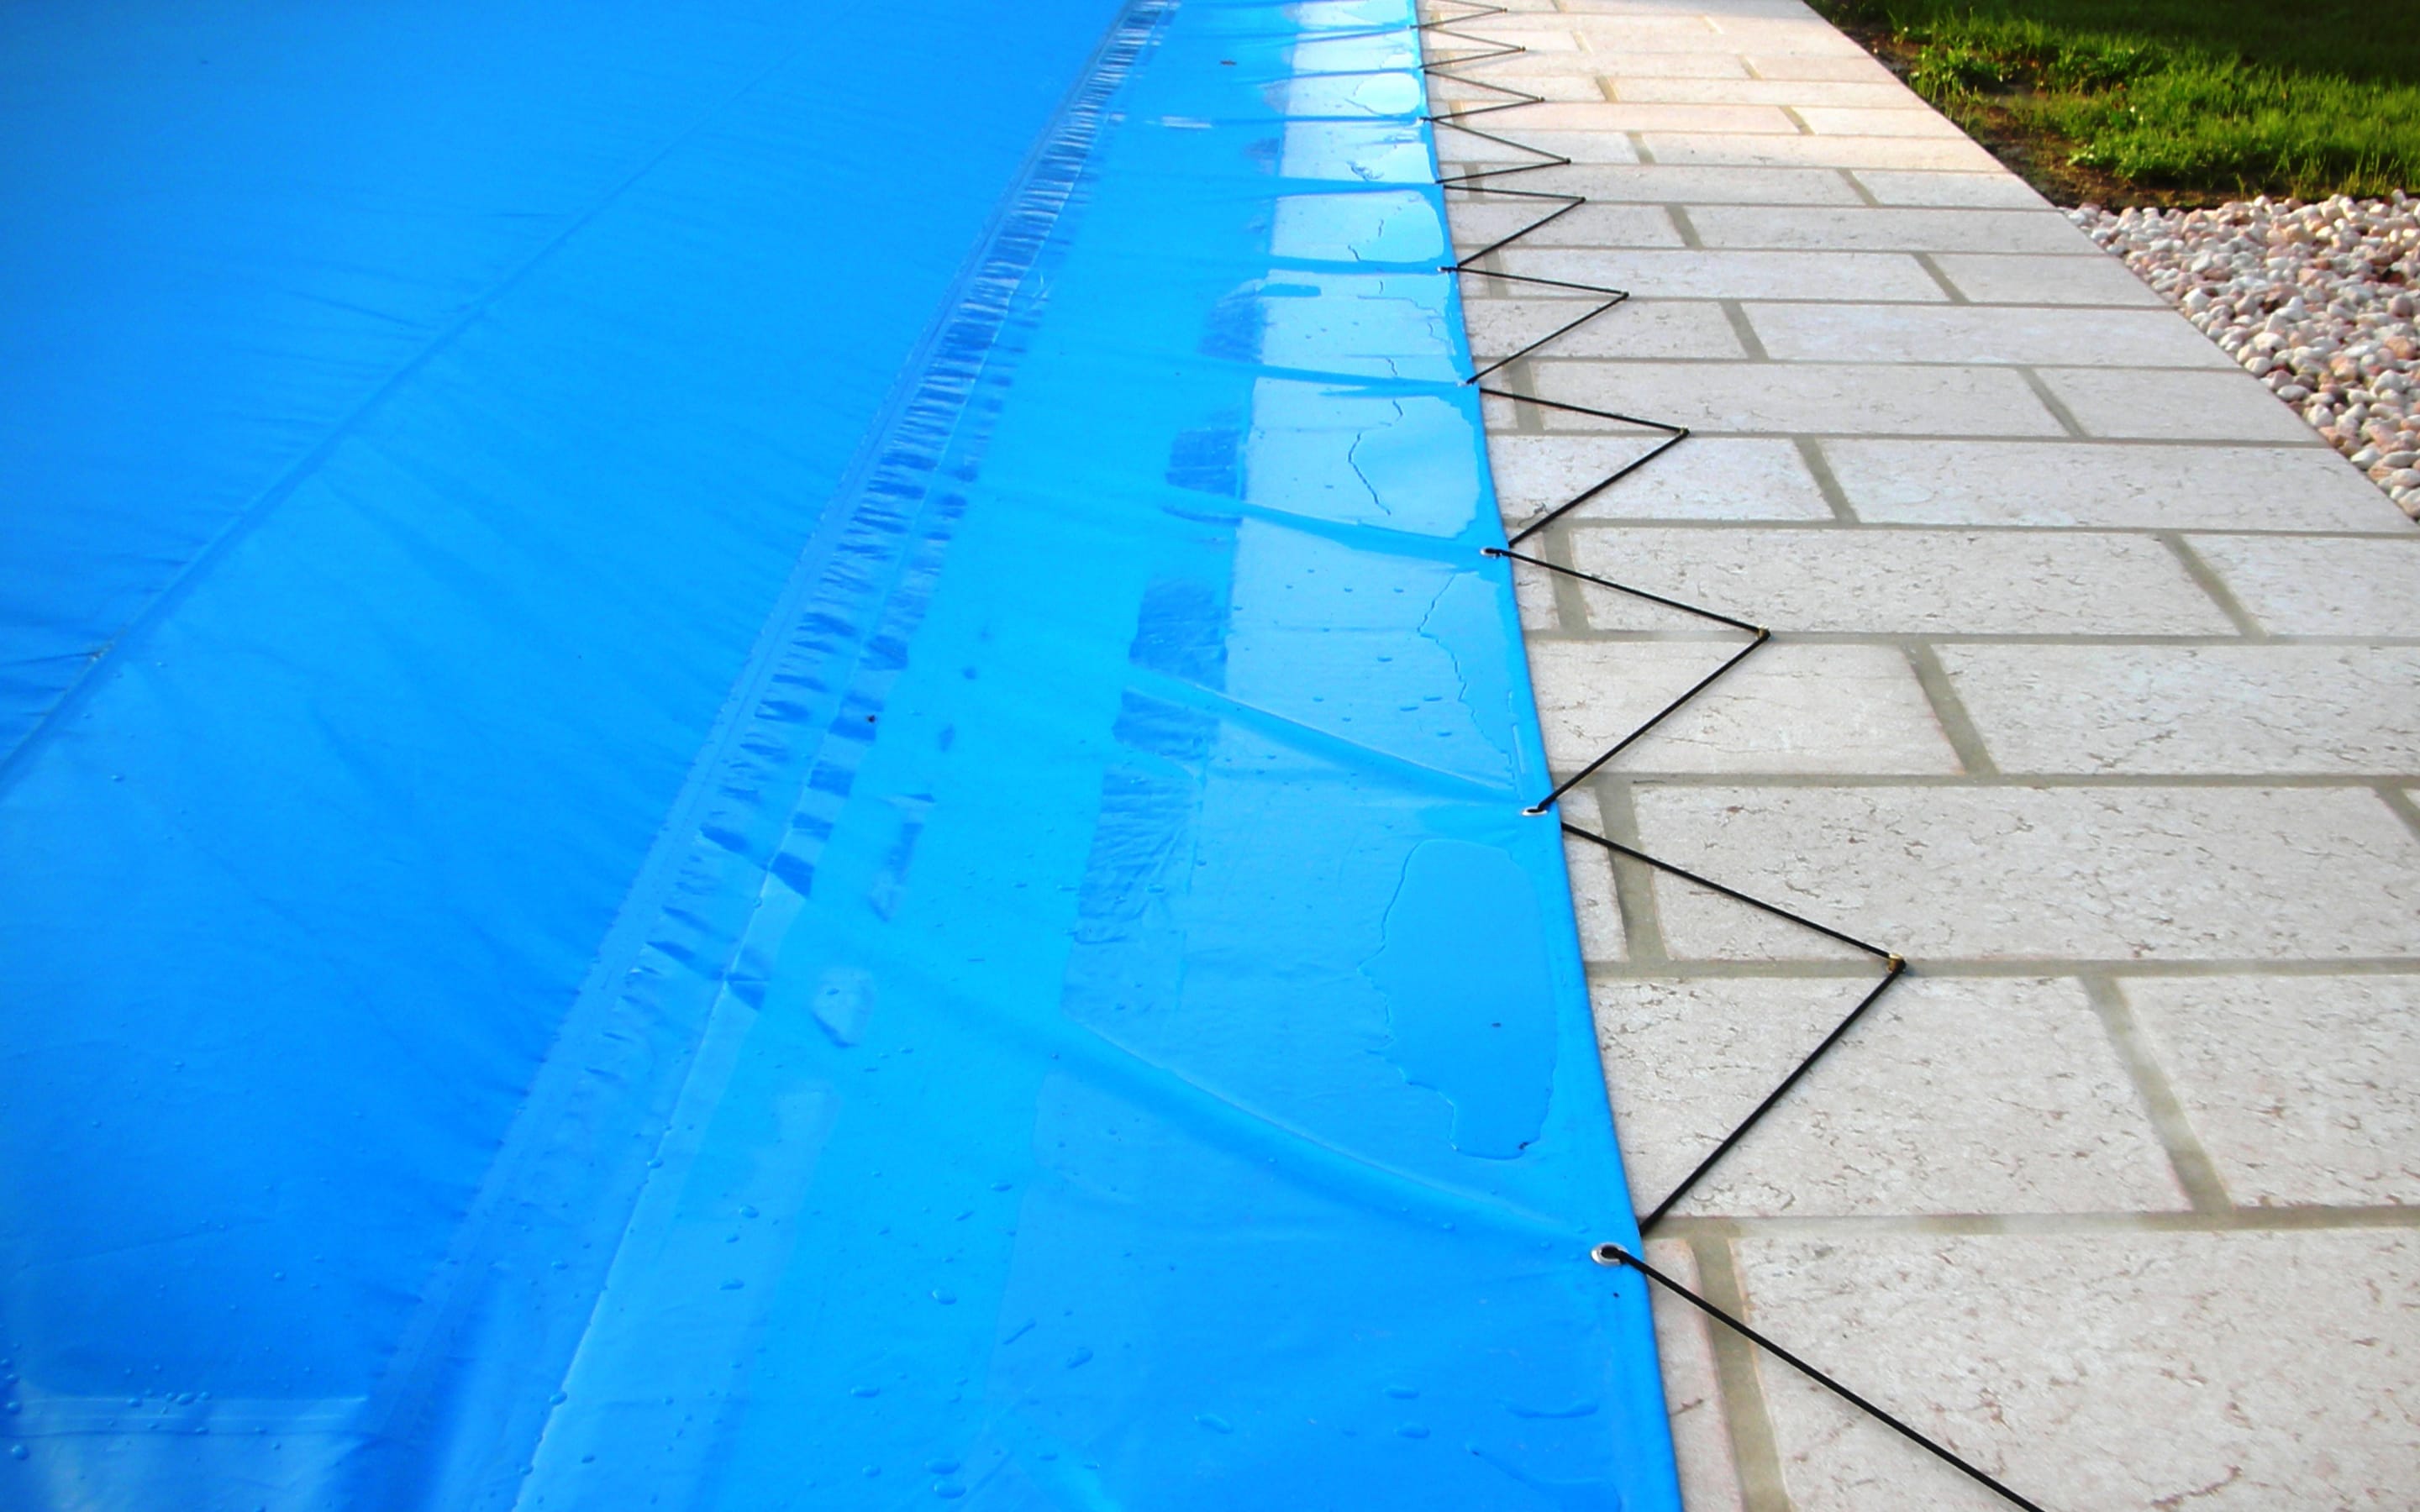 Inflatable winter pool covers